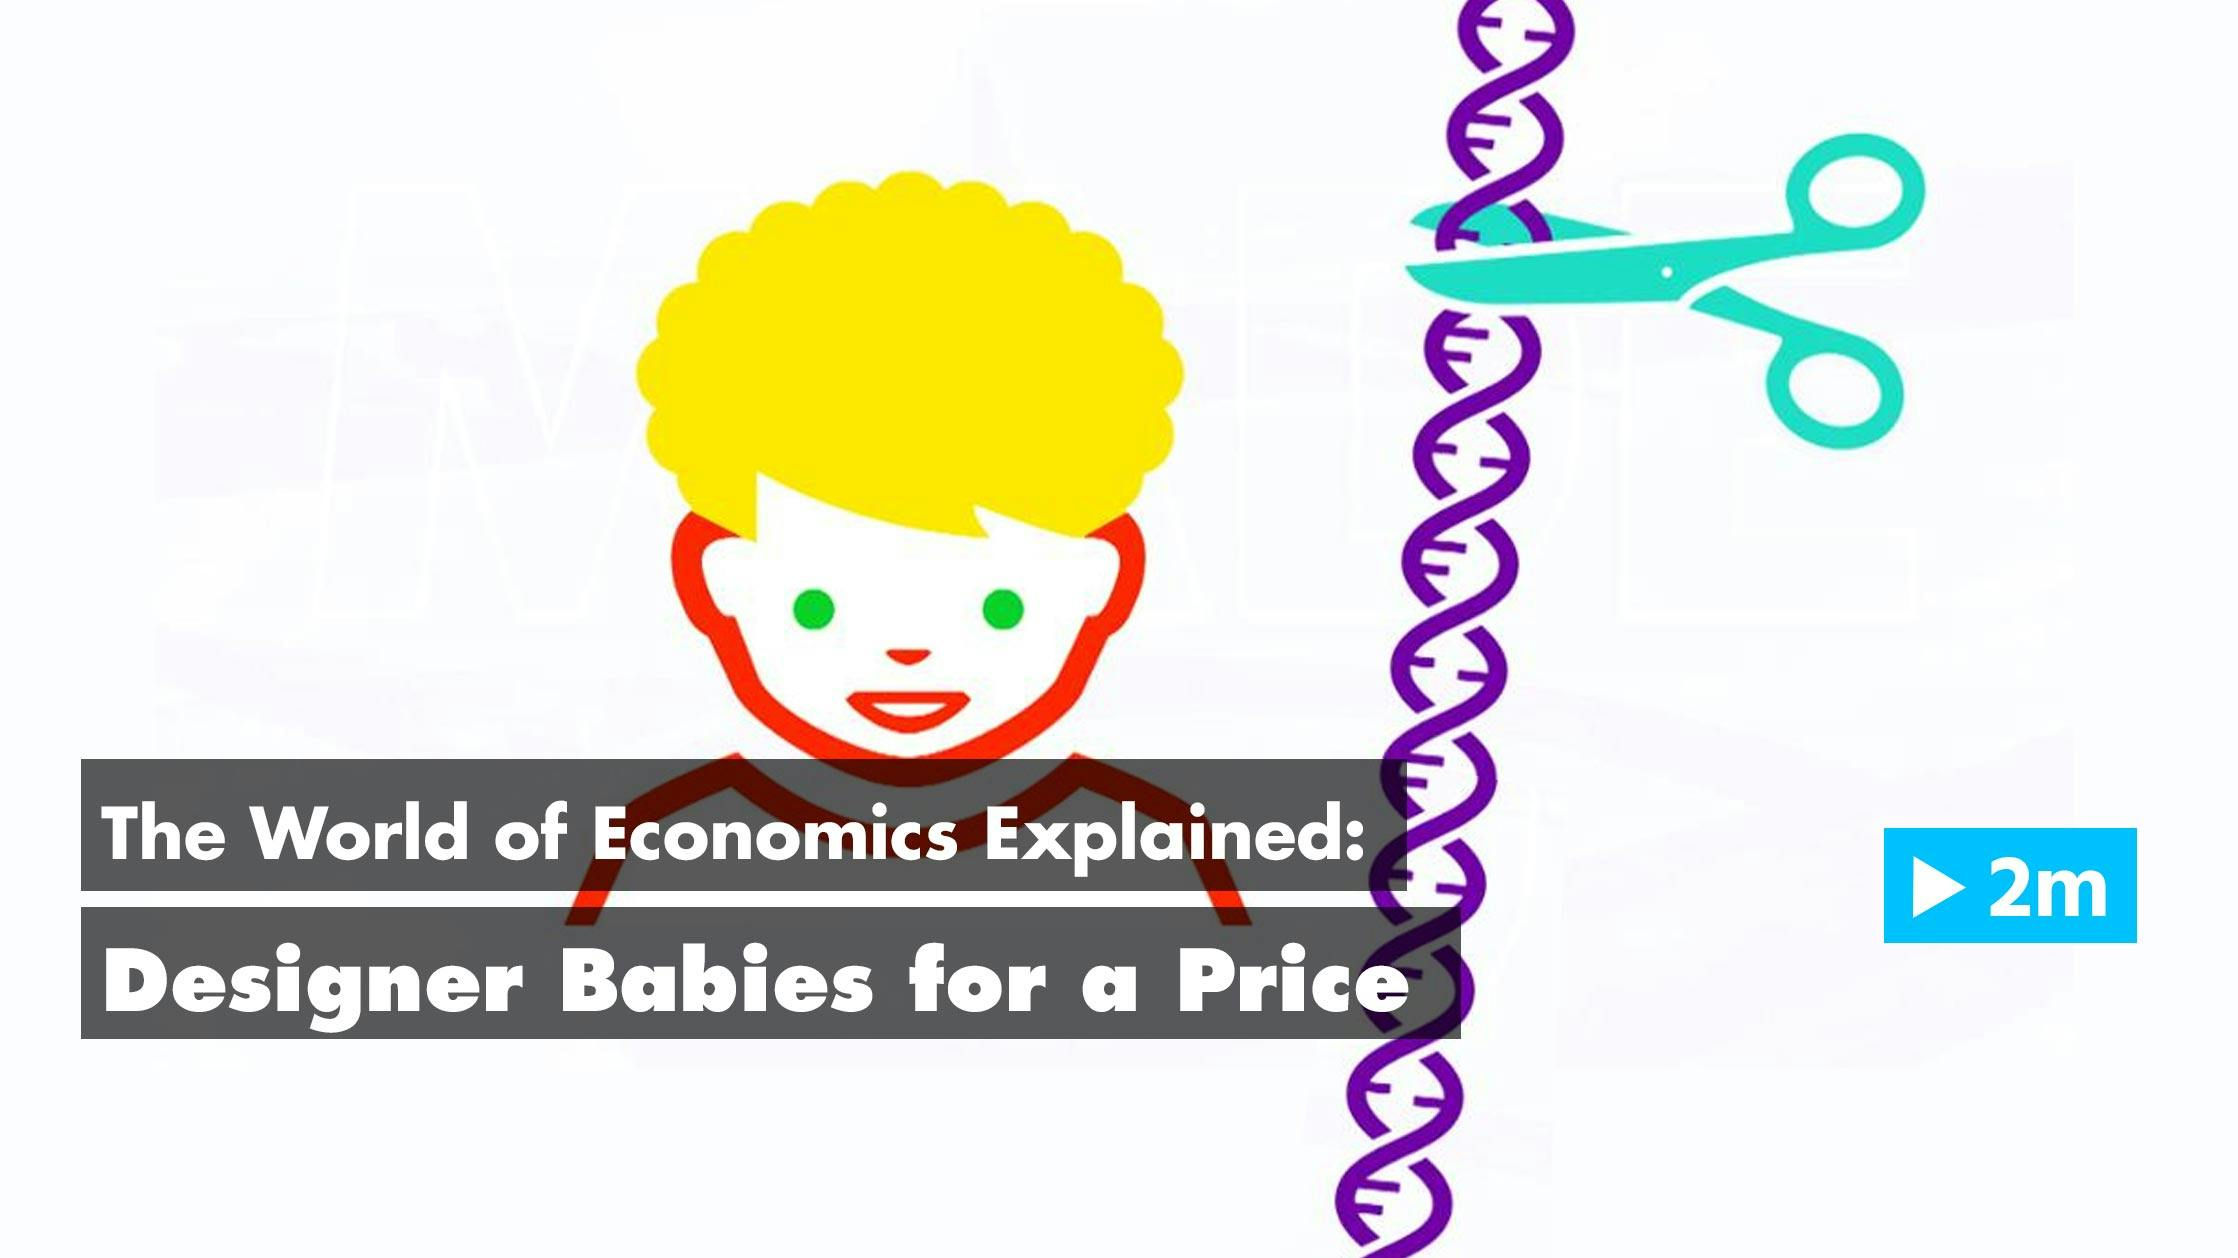 The World of Economics Explained: Designer babies for a price